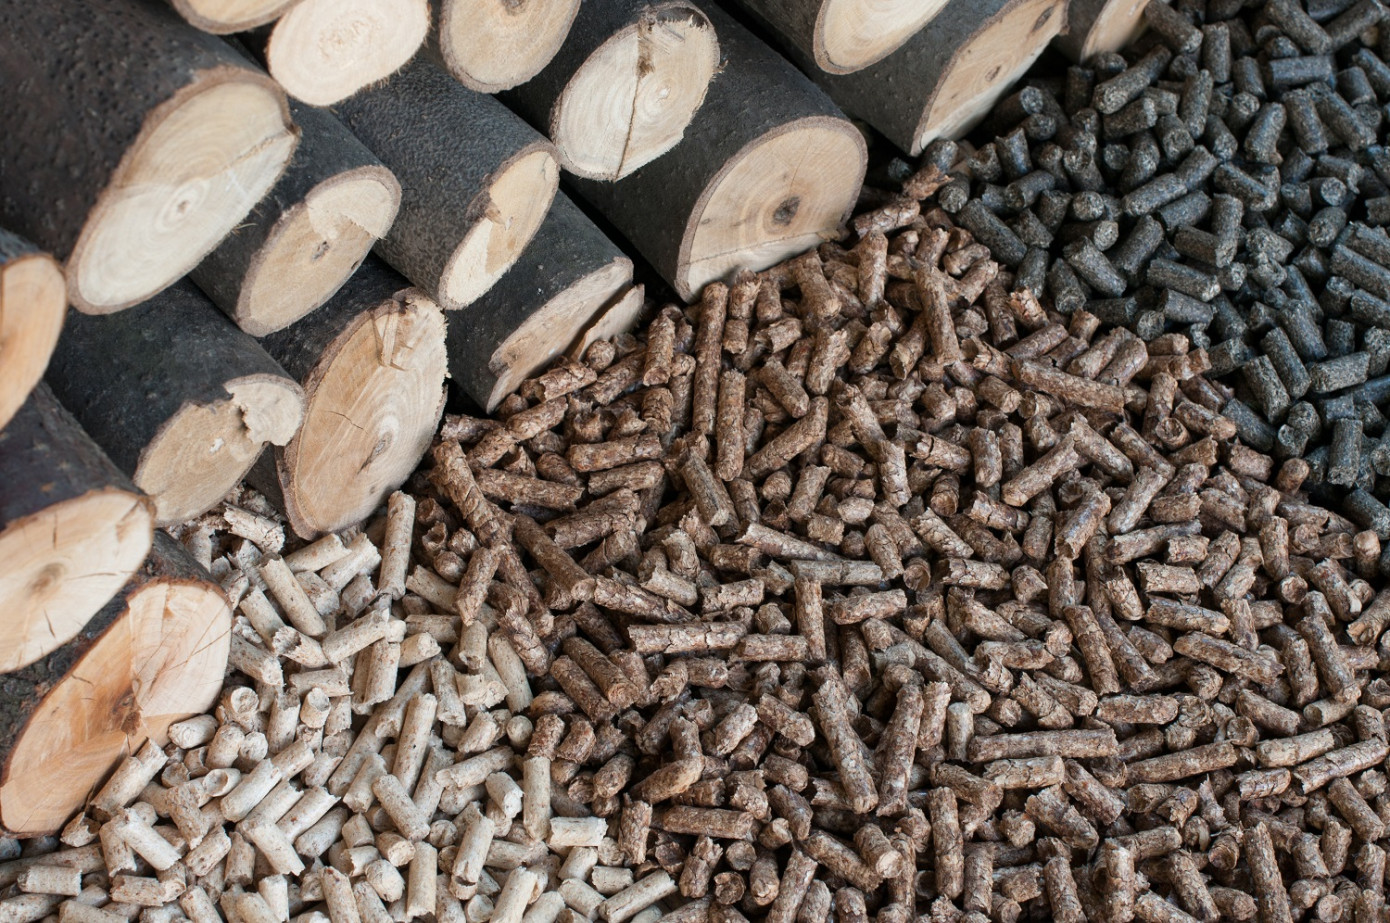 Imports of wood pellets to United Kingdom expand 46% in January